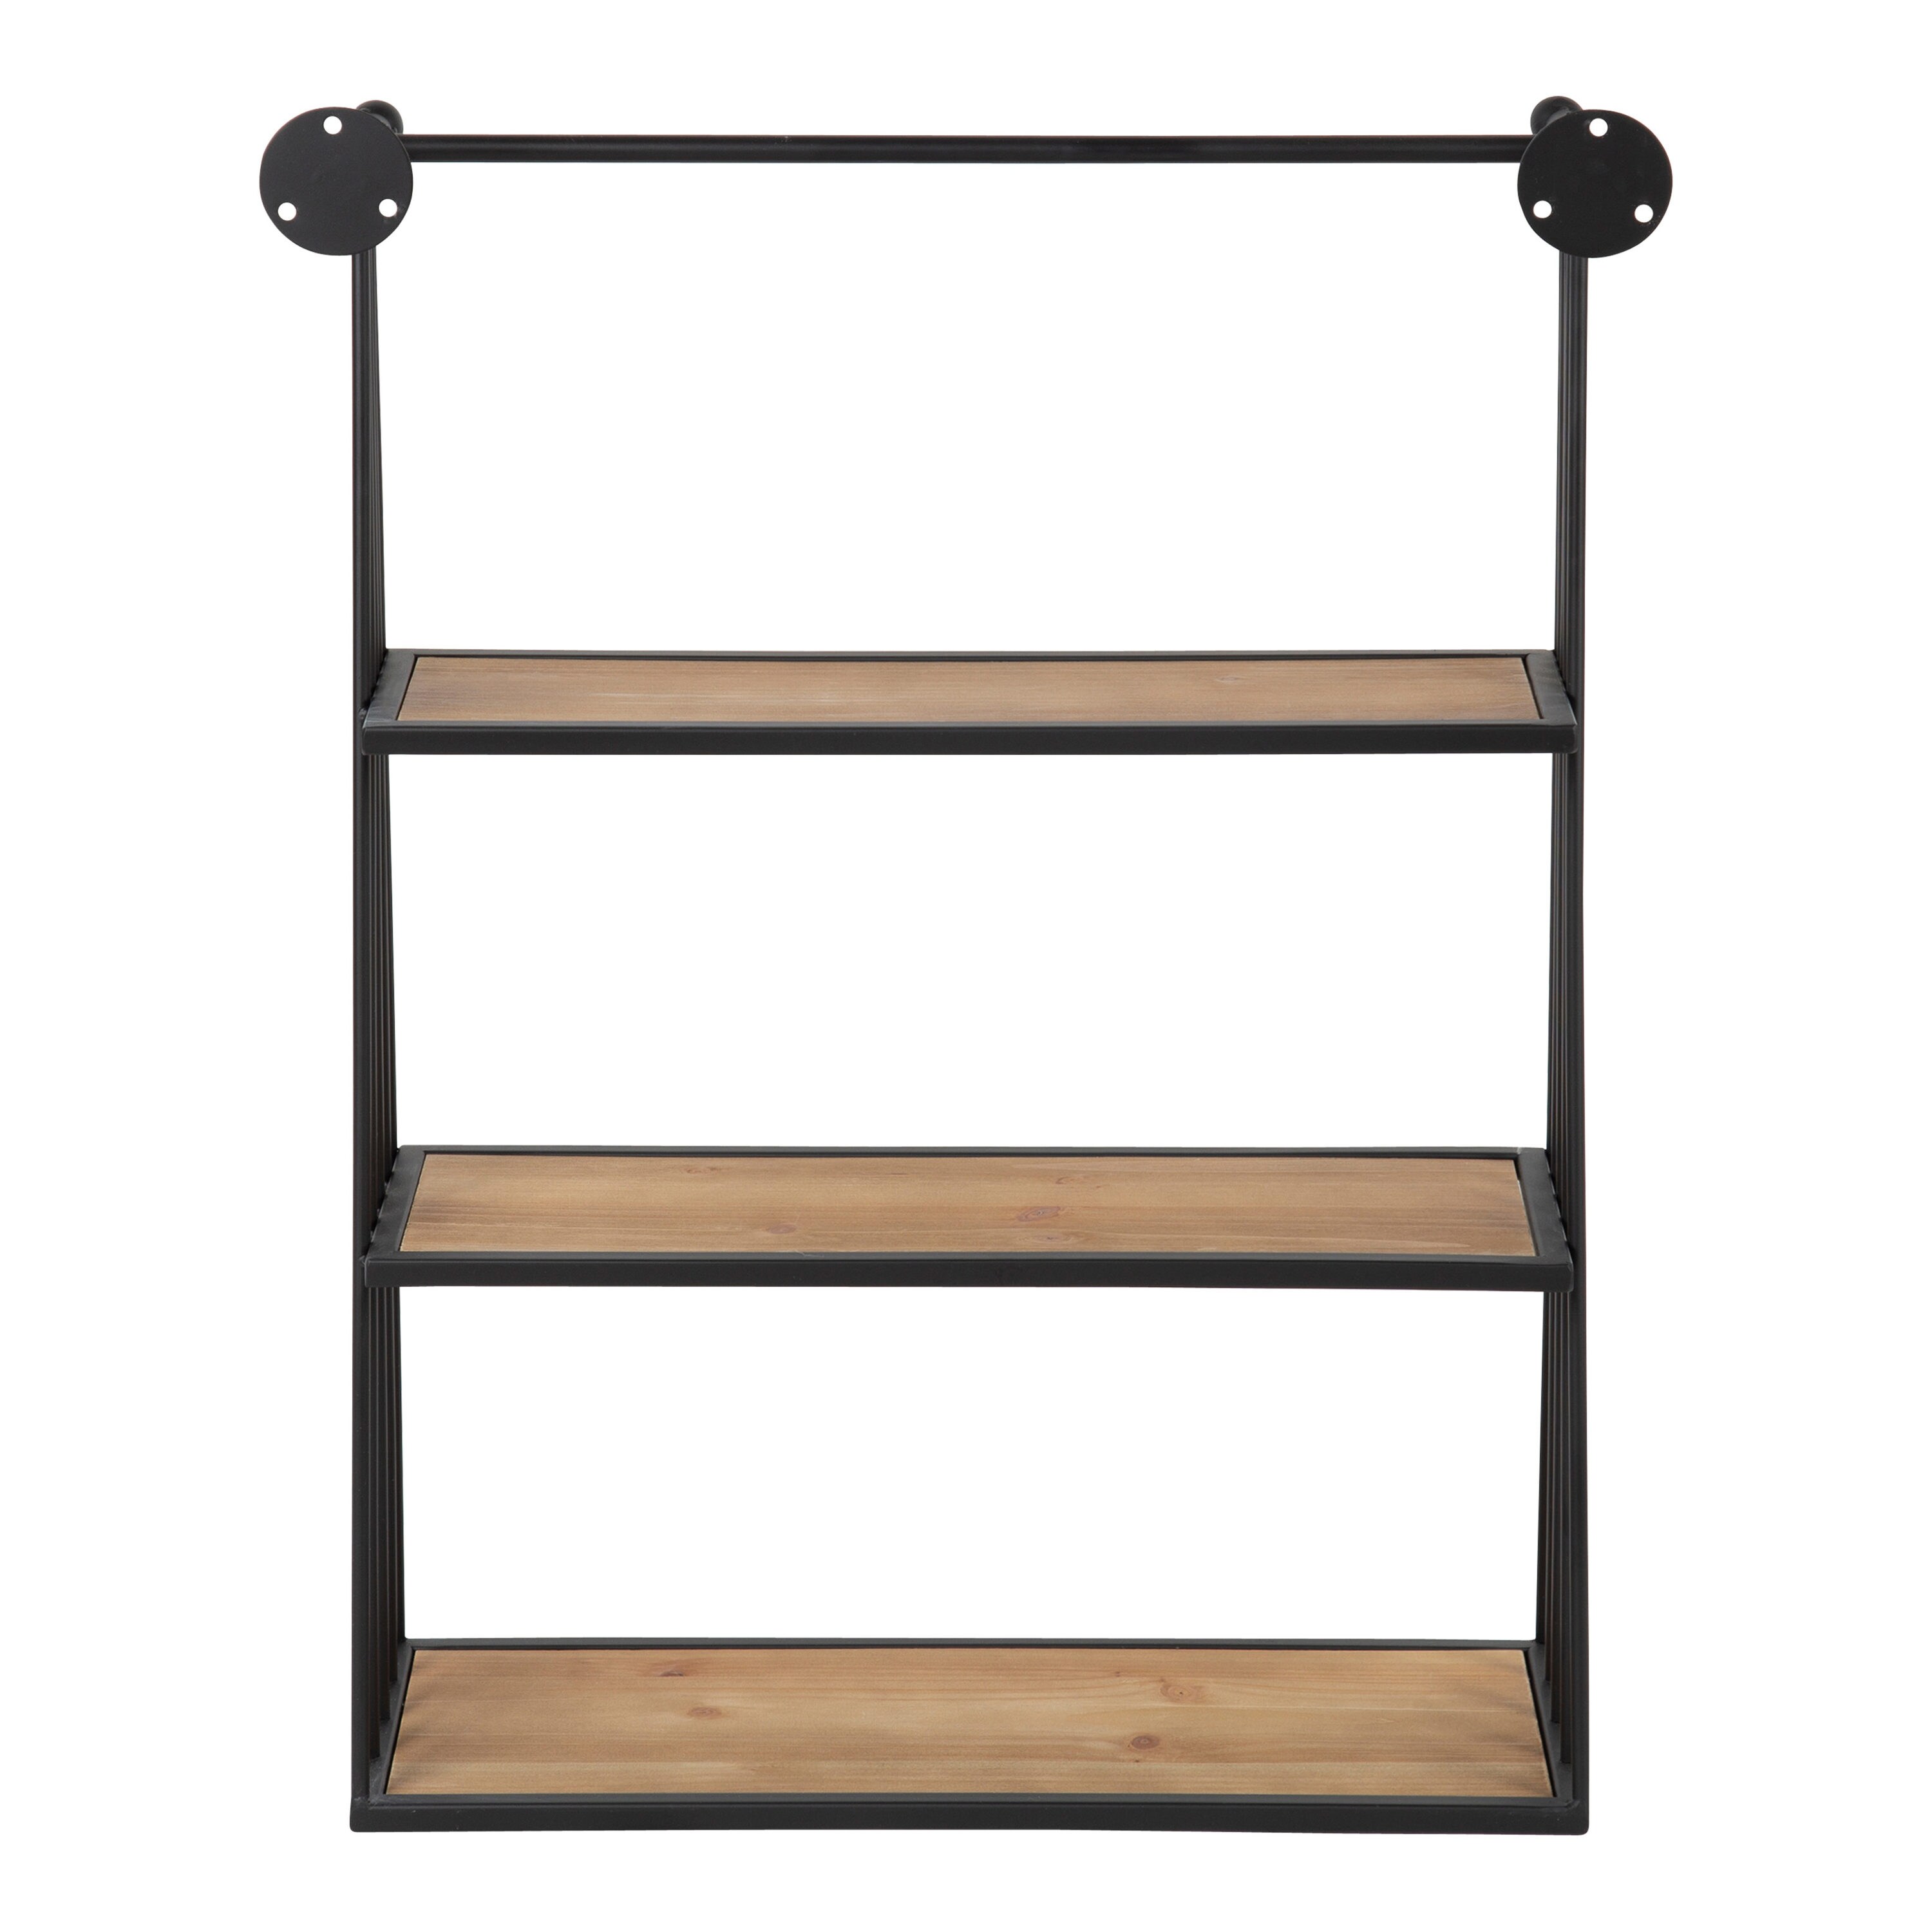 Yoga Storage Mat Shelf Wall Mount Rack with Chalkboard and Liquid Chalk  Rustic Rope for Hanging and Storage of Your Yoga Mat